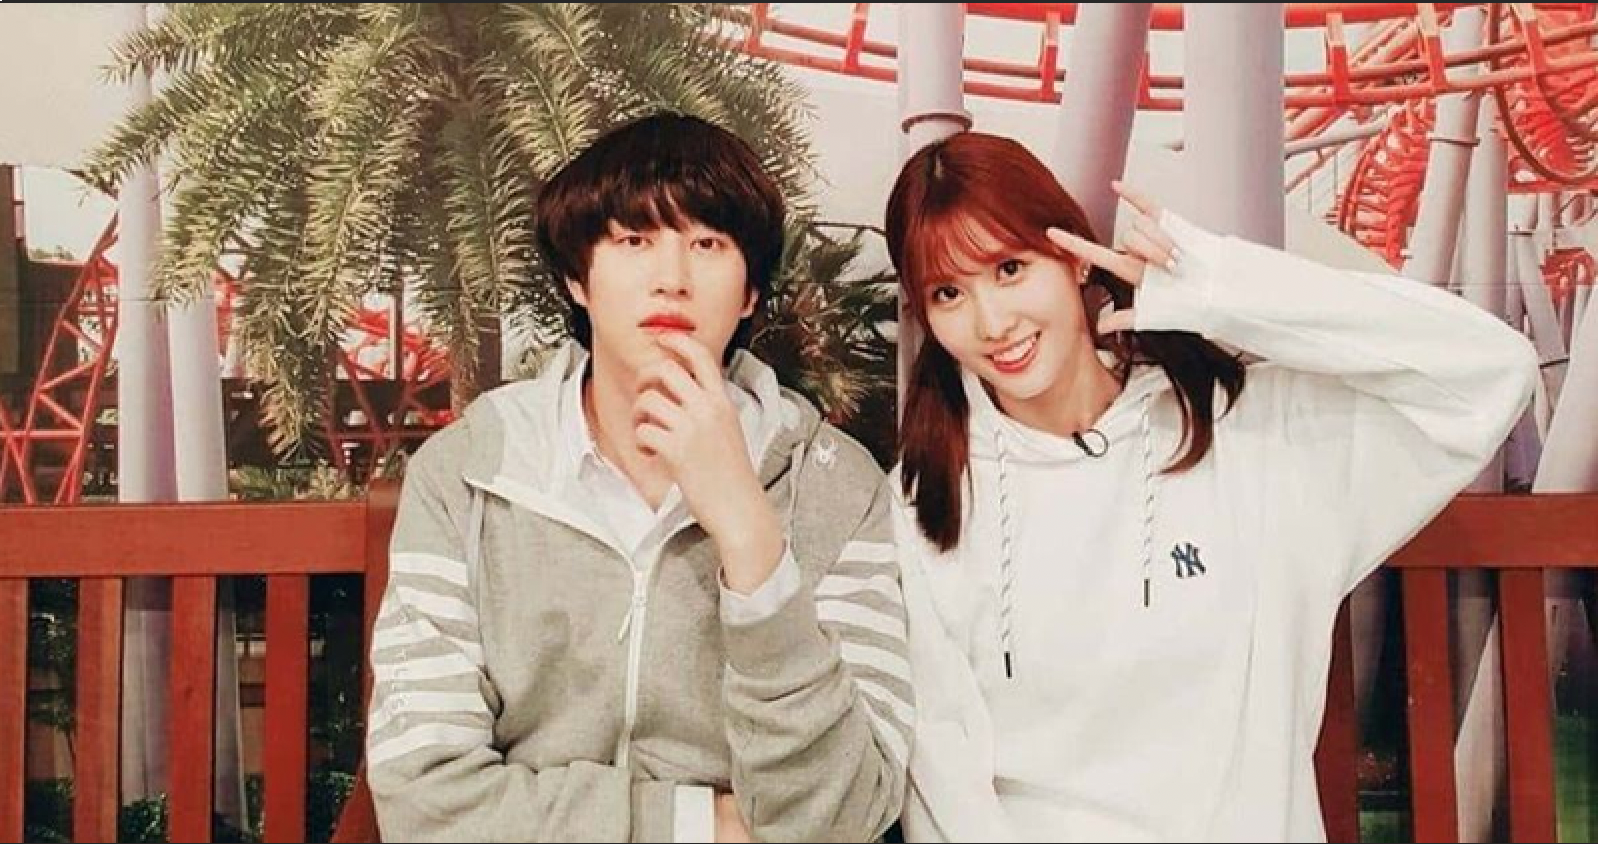 Super Junior Heechul's Remarks About His Past Relationships Draw Flak